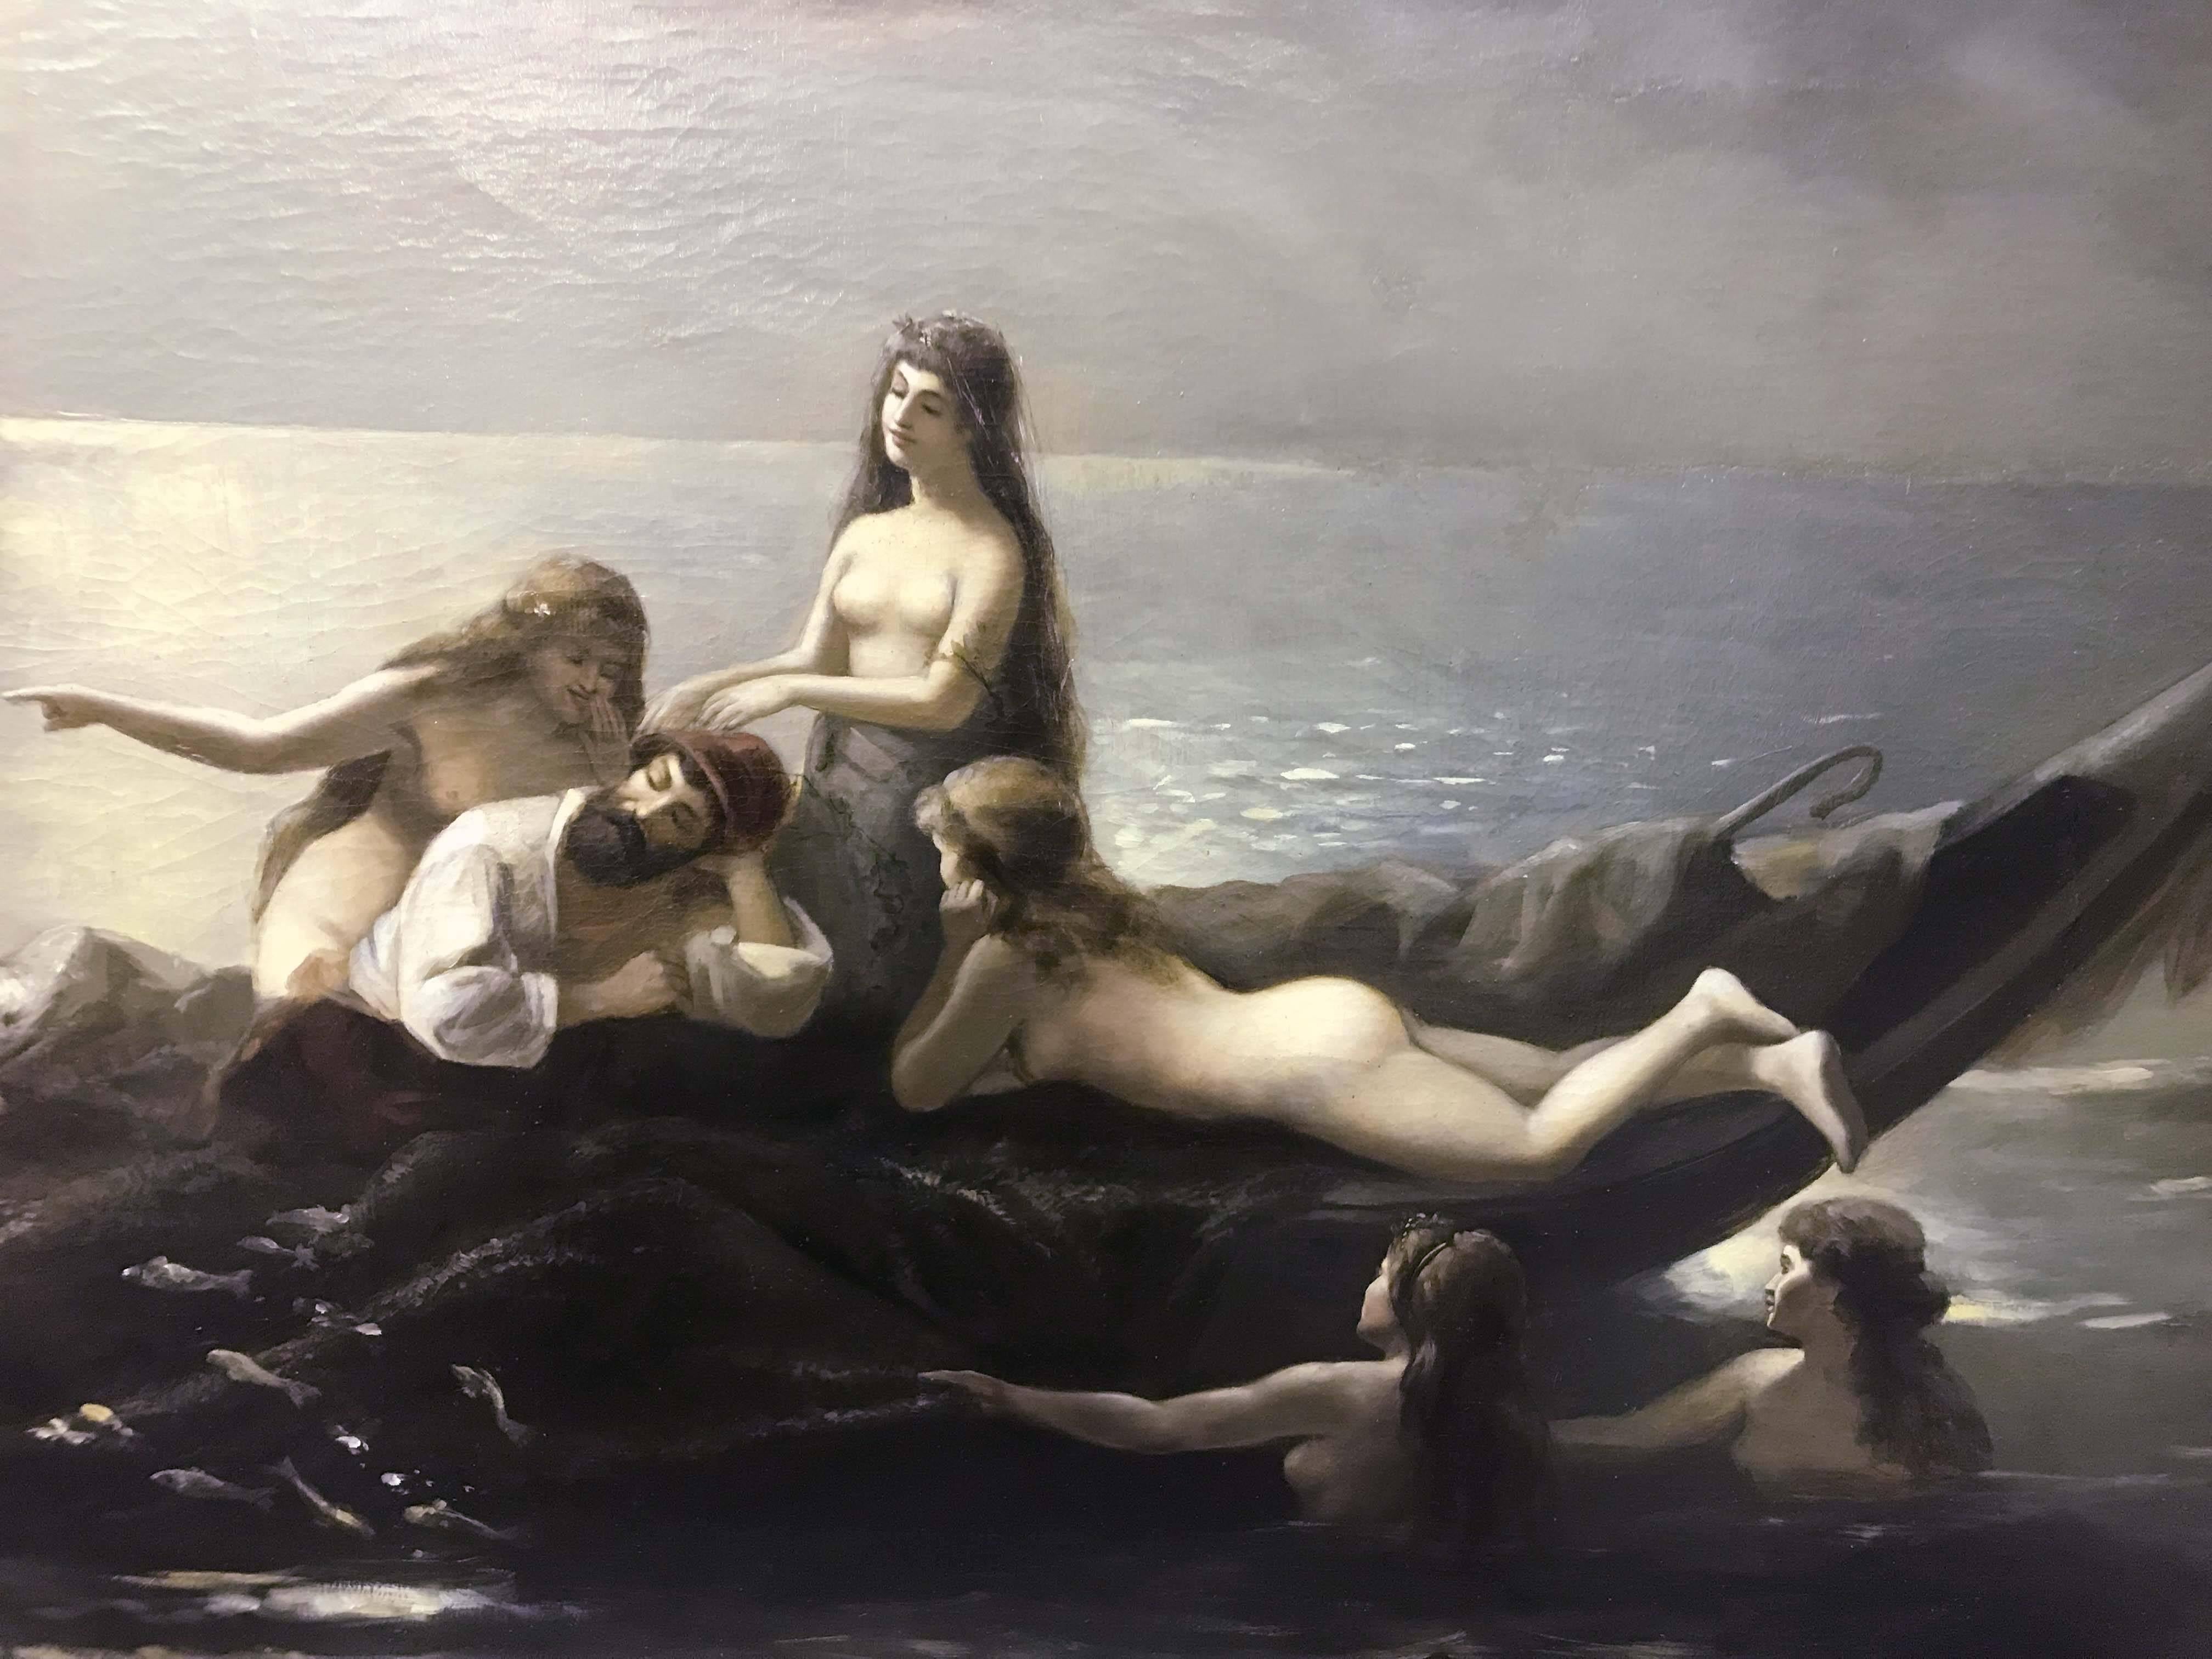 Sirens - Romantic Painting by A. Dubois